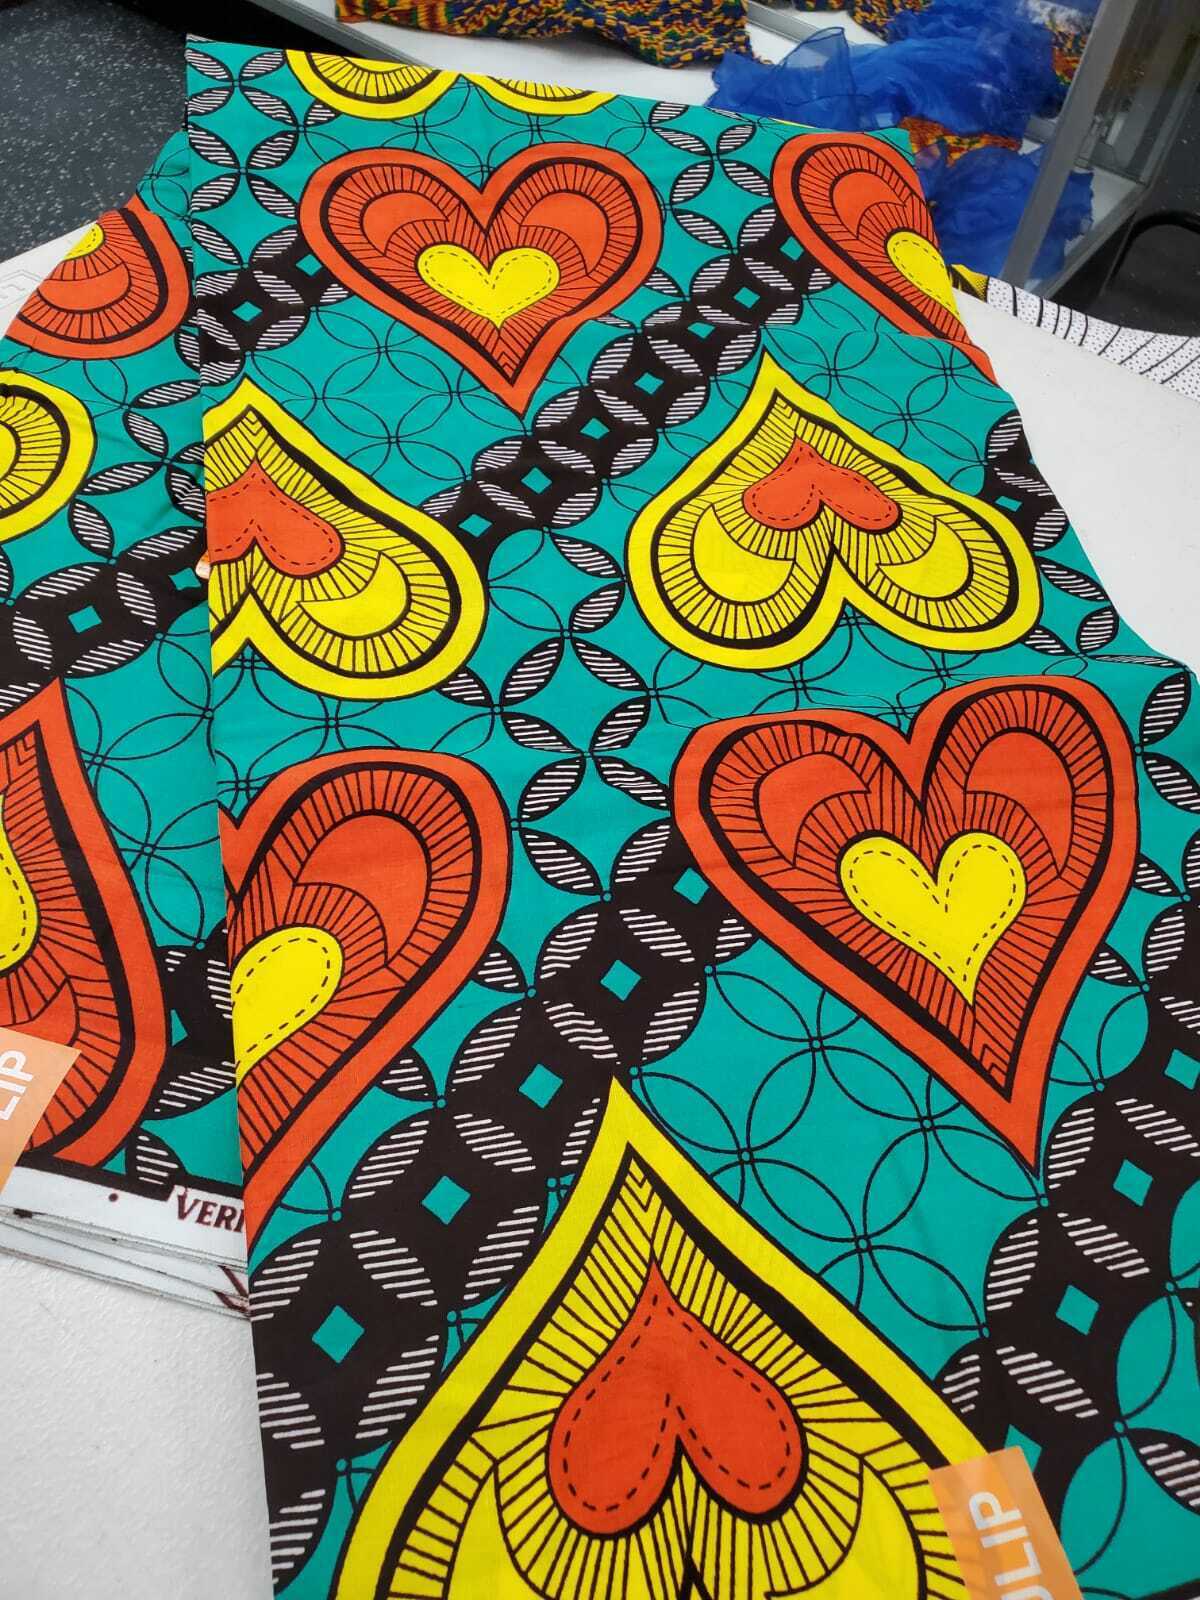 Jungle Fever Multi African fabric 100% Cotton 2 yards $10